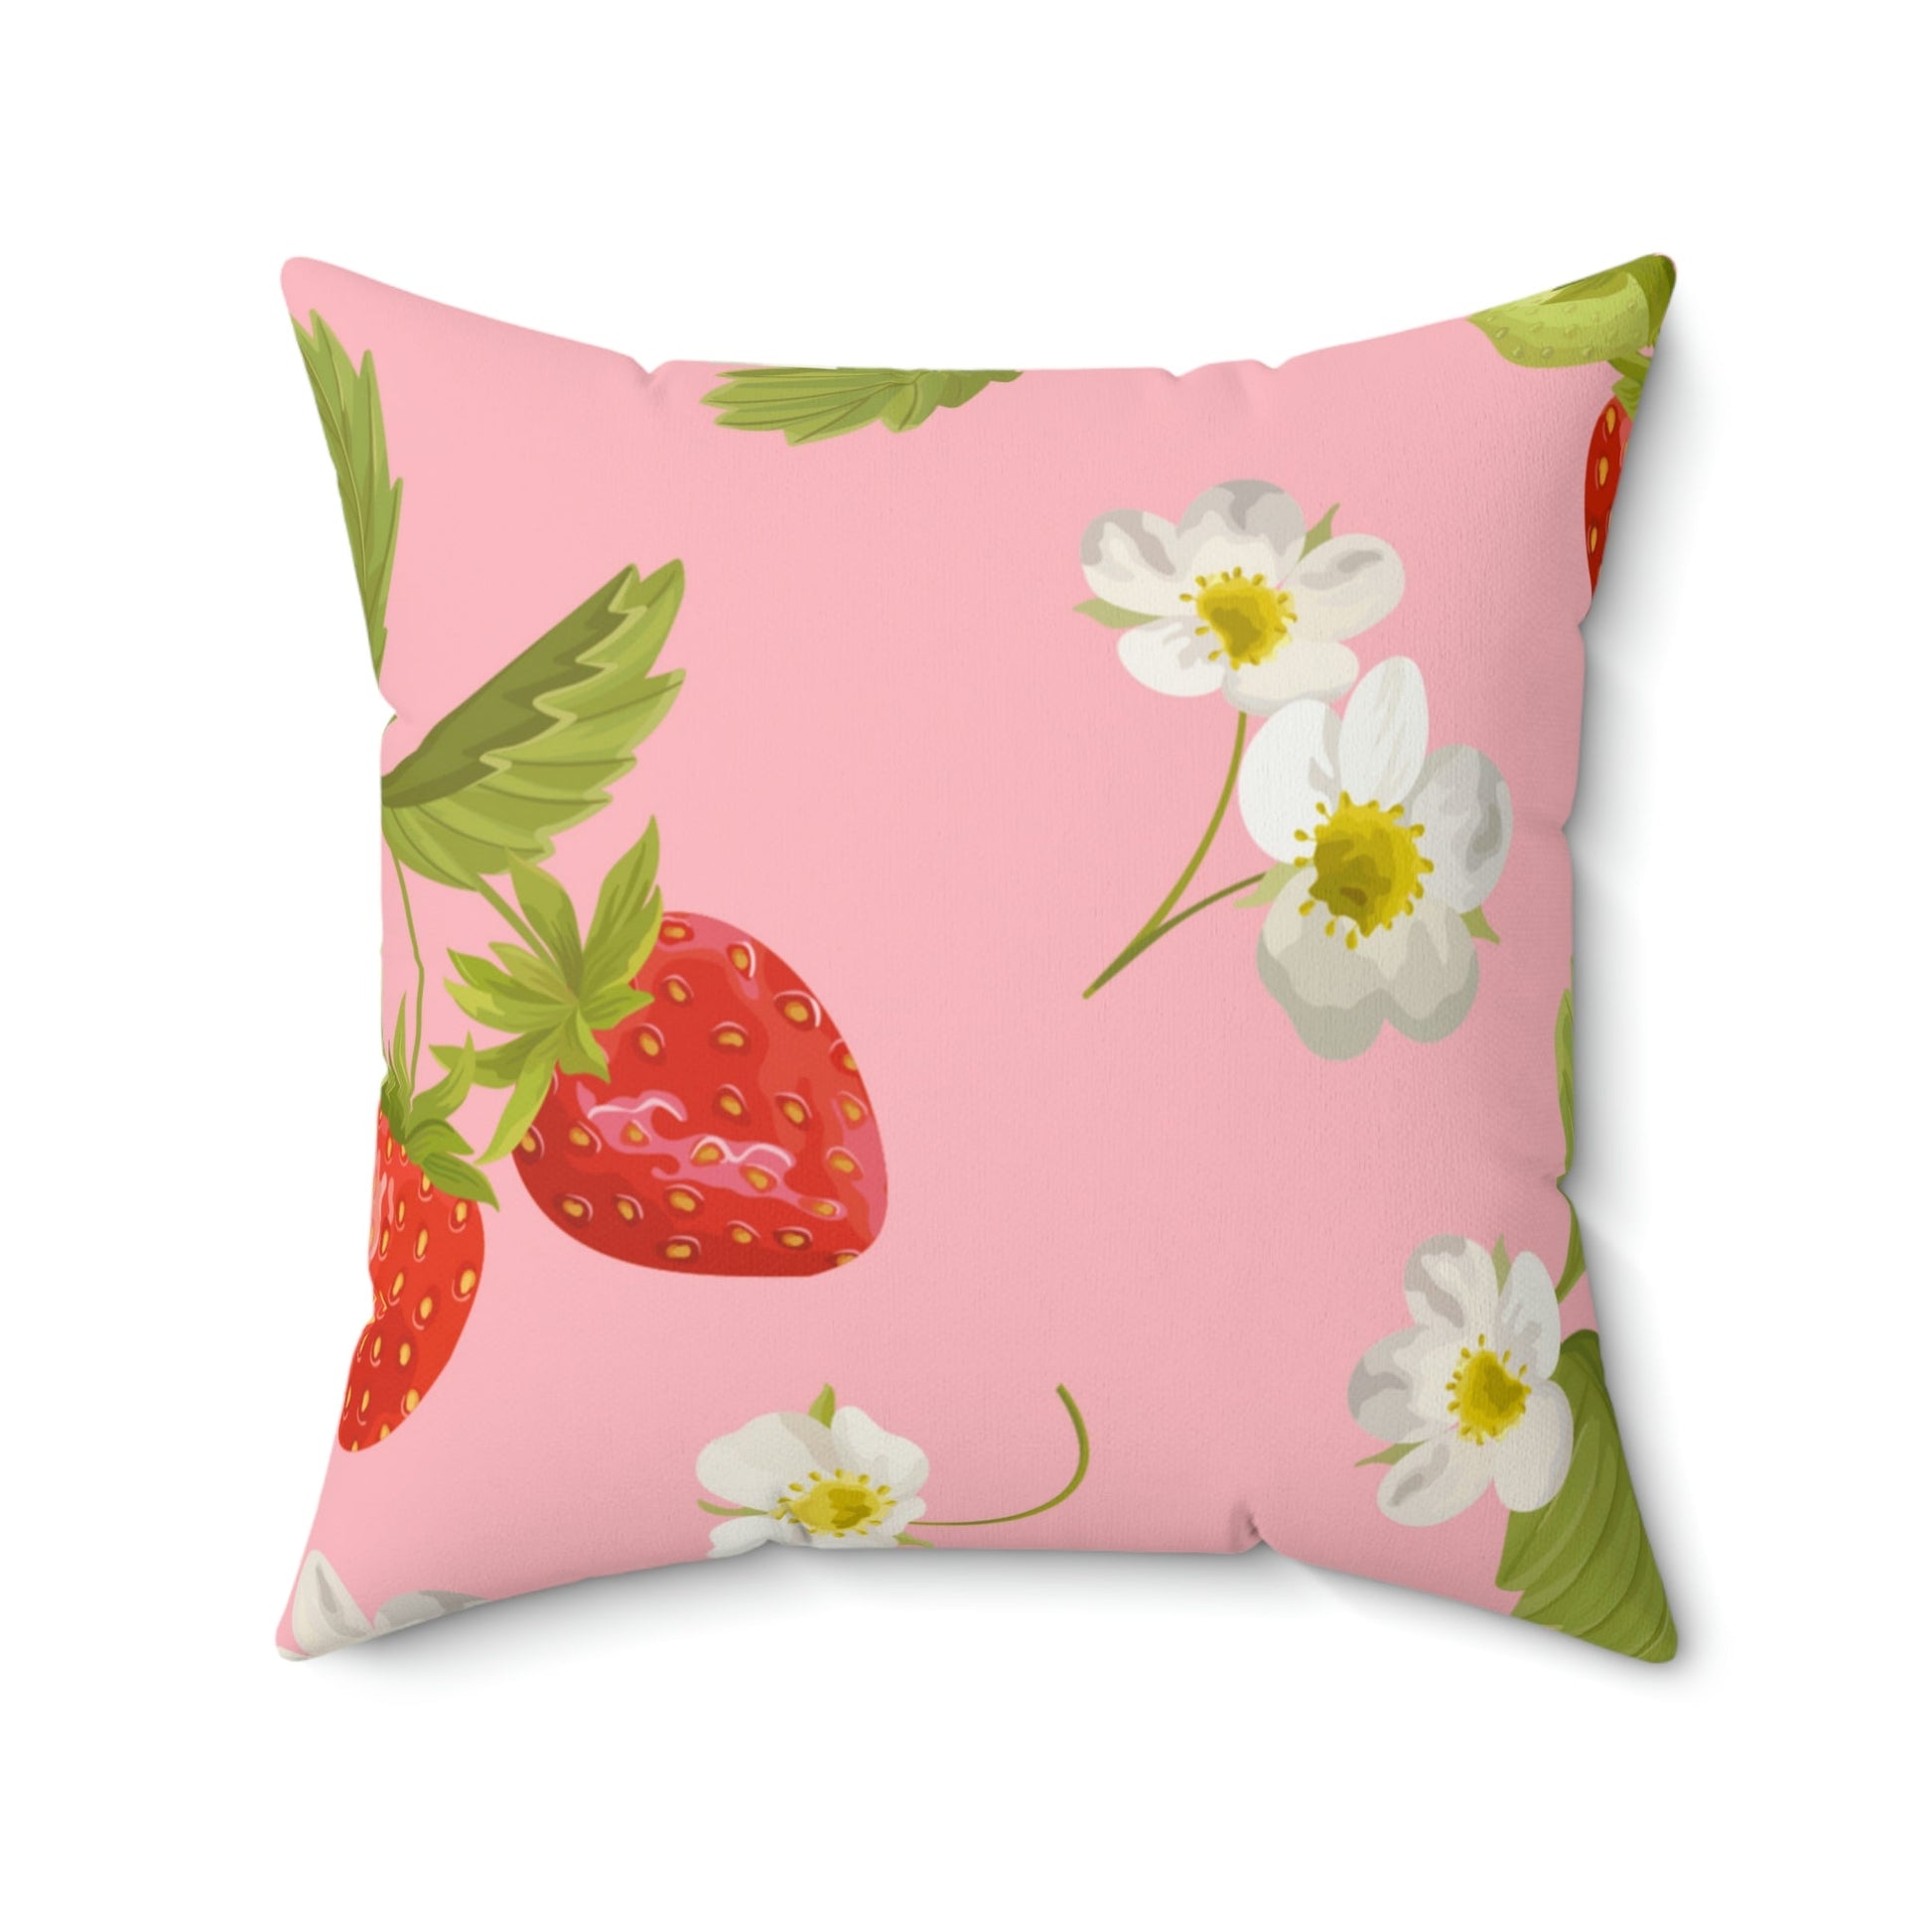 Strawberries and Flowers Square Pillow Home Decor Pink Sweetheart